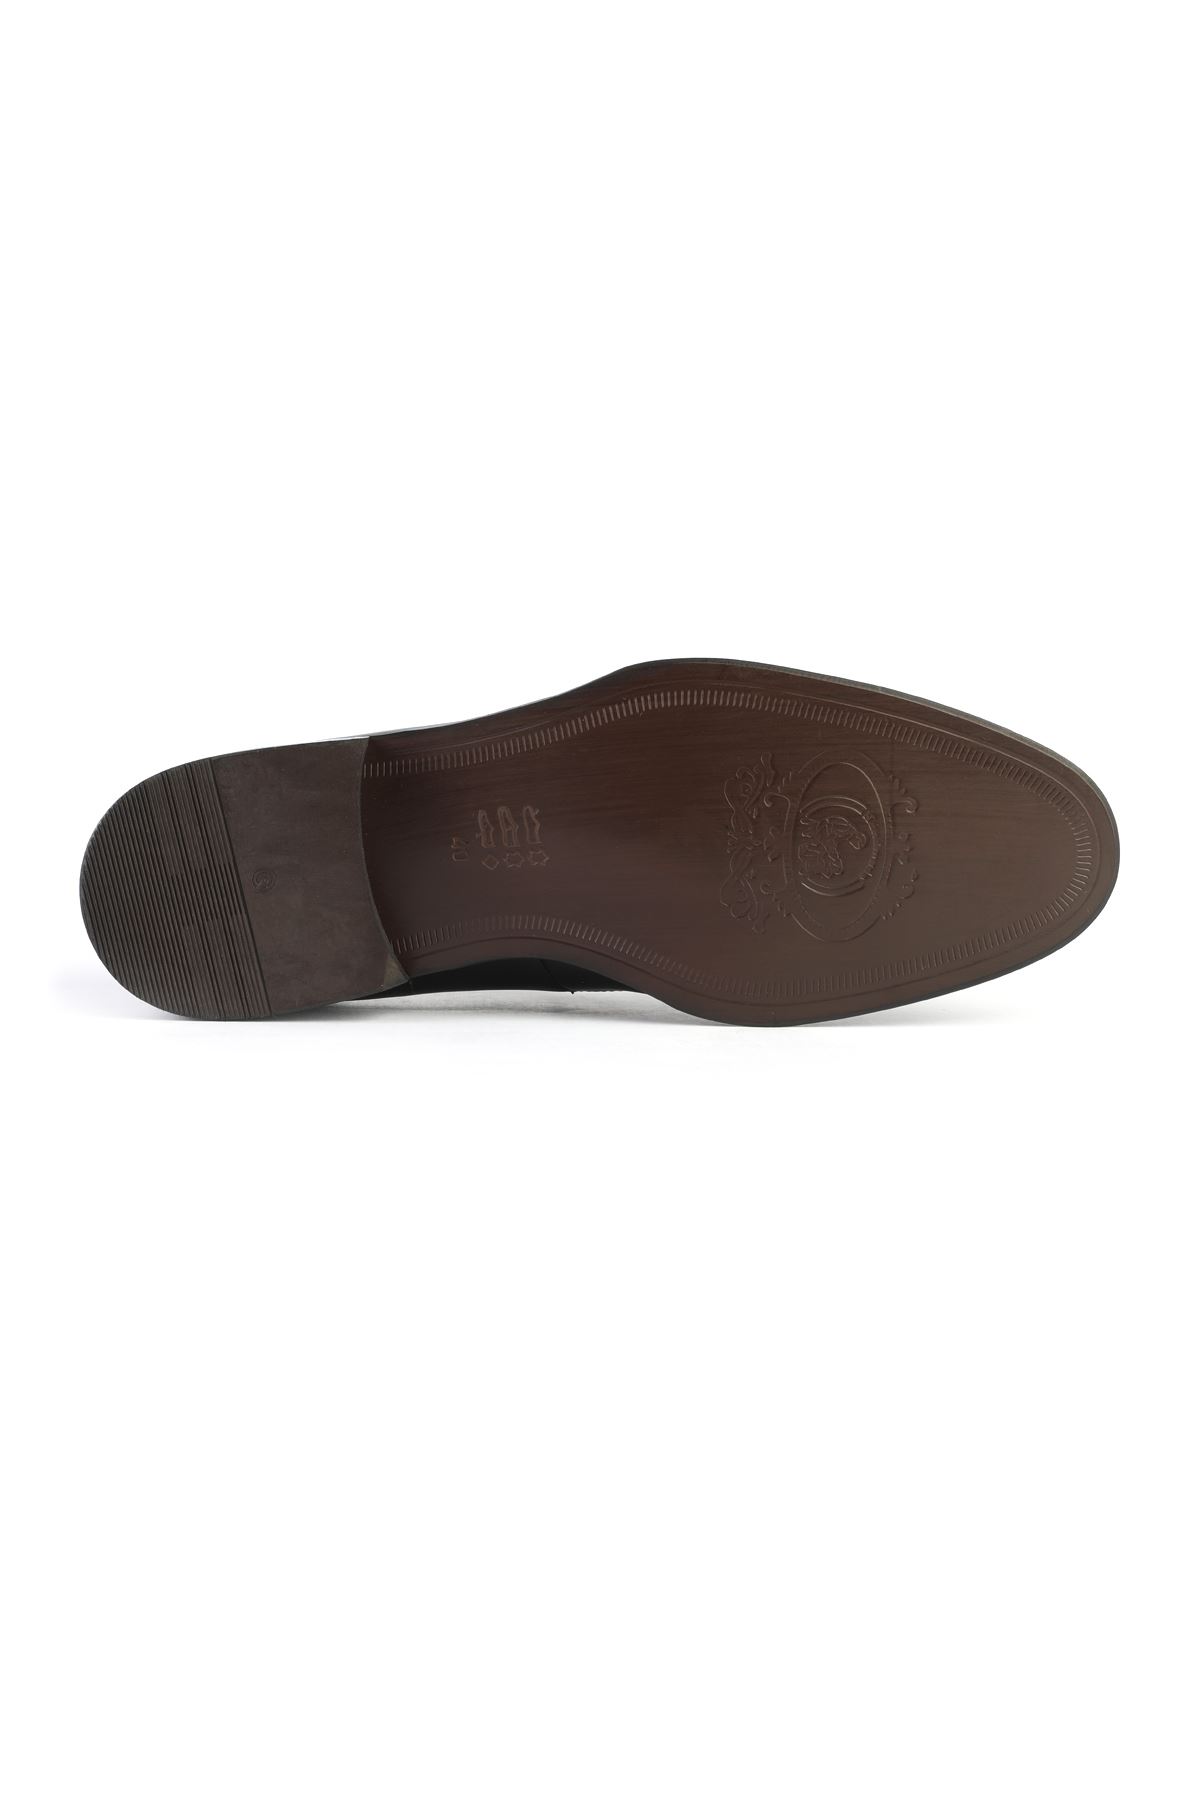 Libero 2402 Brown Loafer Shoes